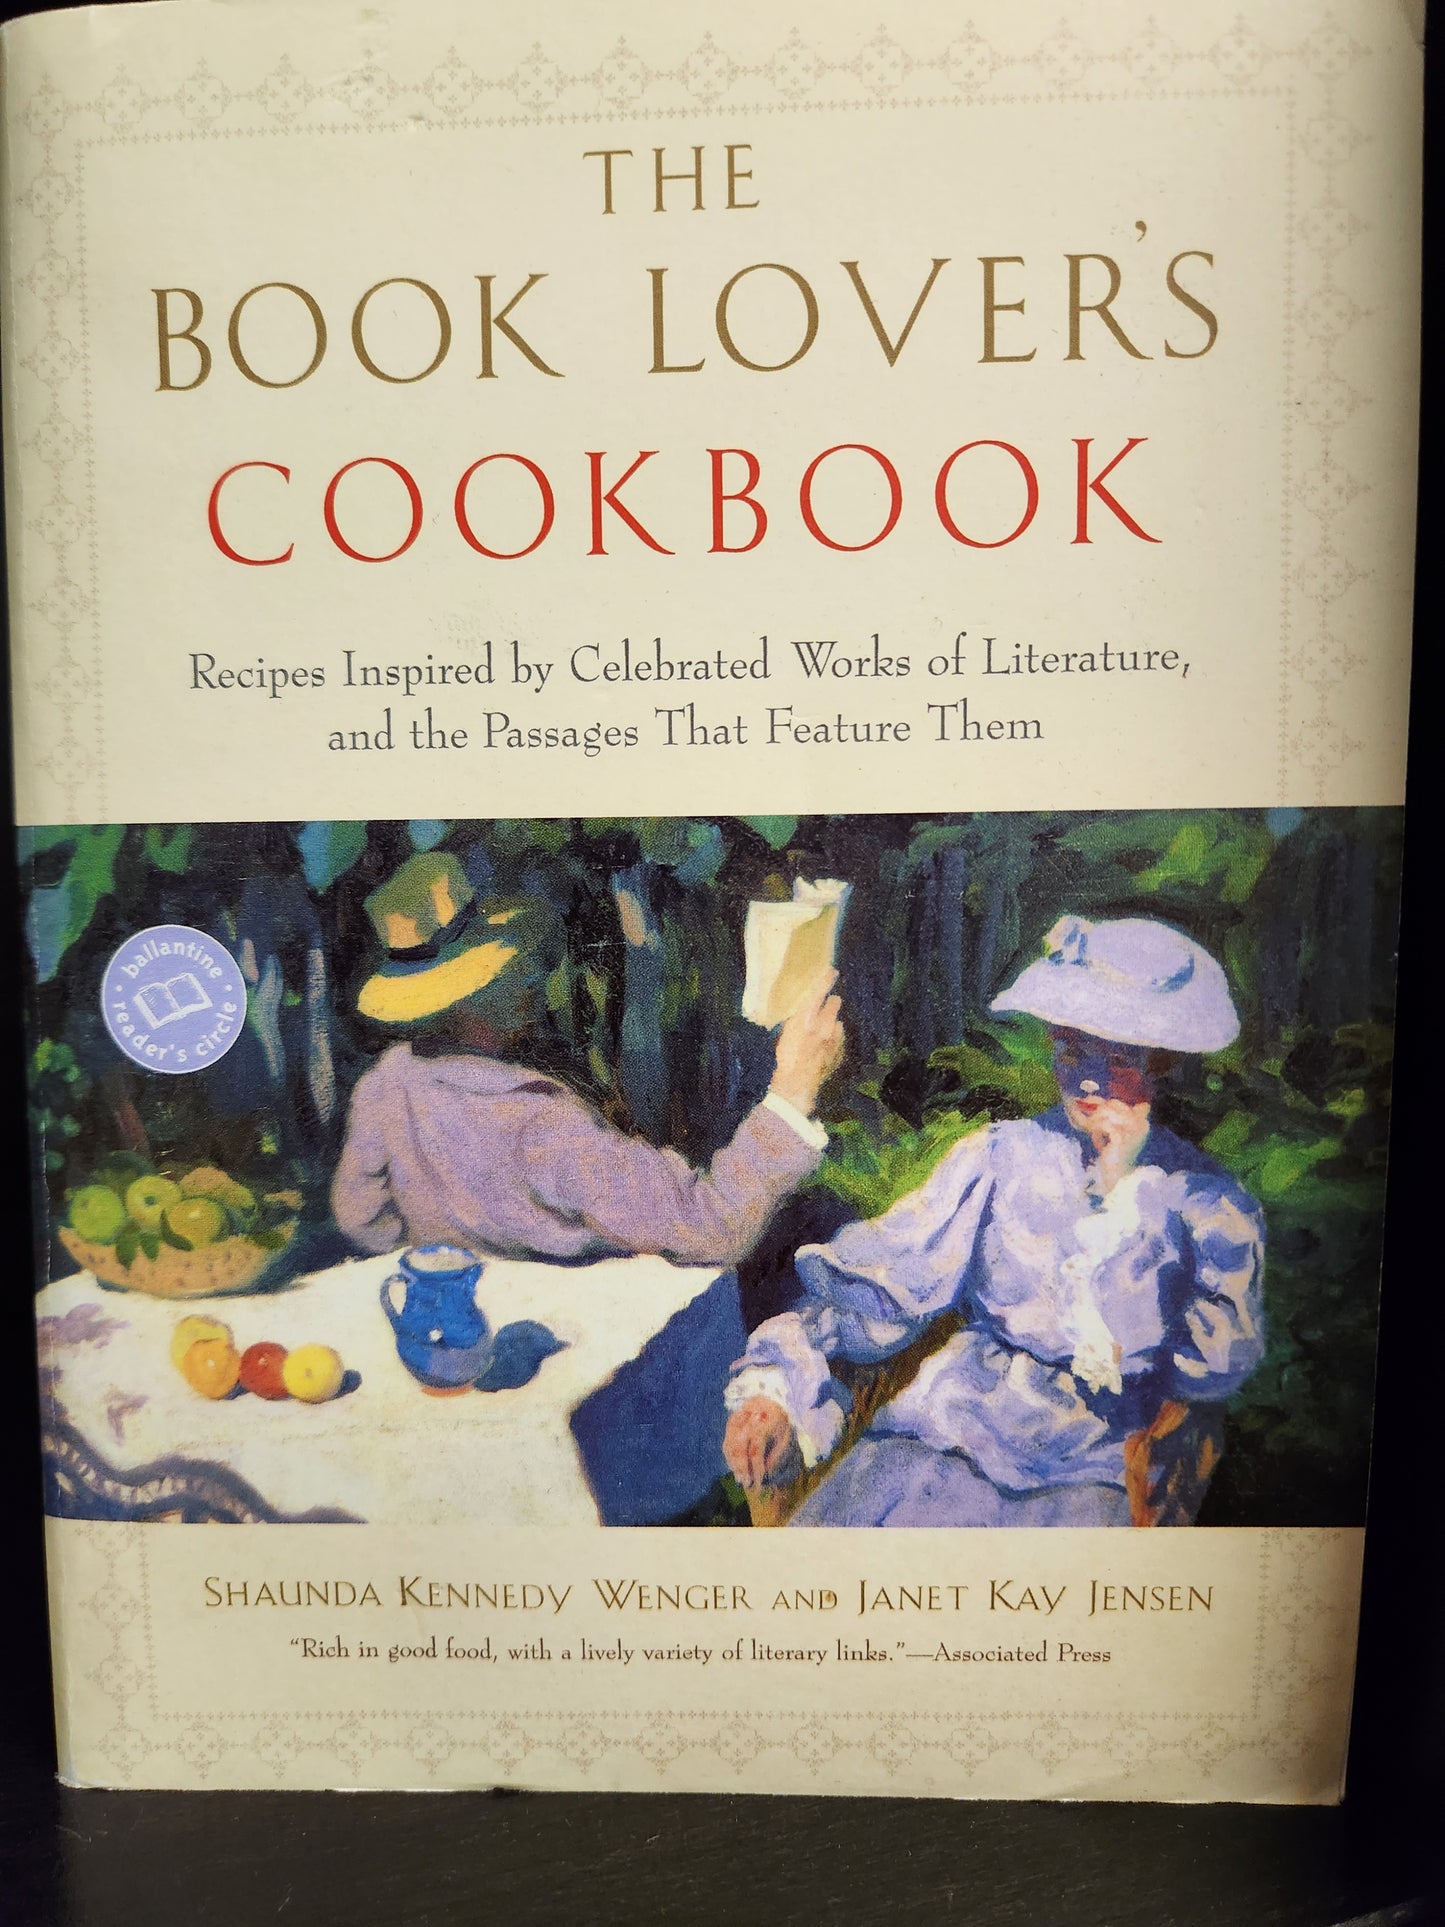 The Book Lovers Cookbook by Shaunda Kennedy Wenger and Janet Jensen